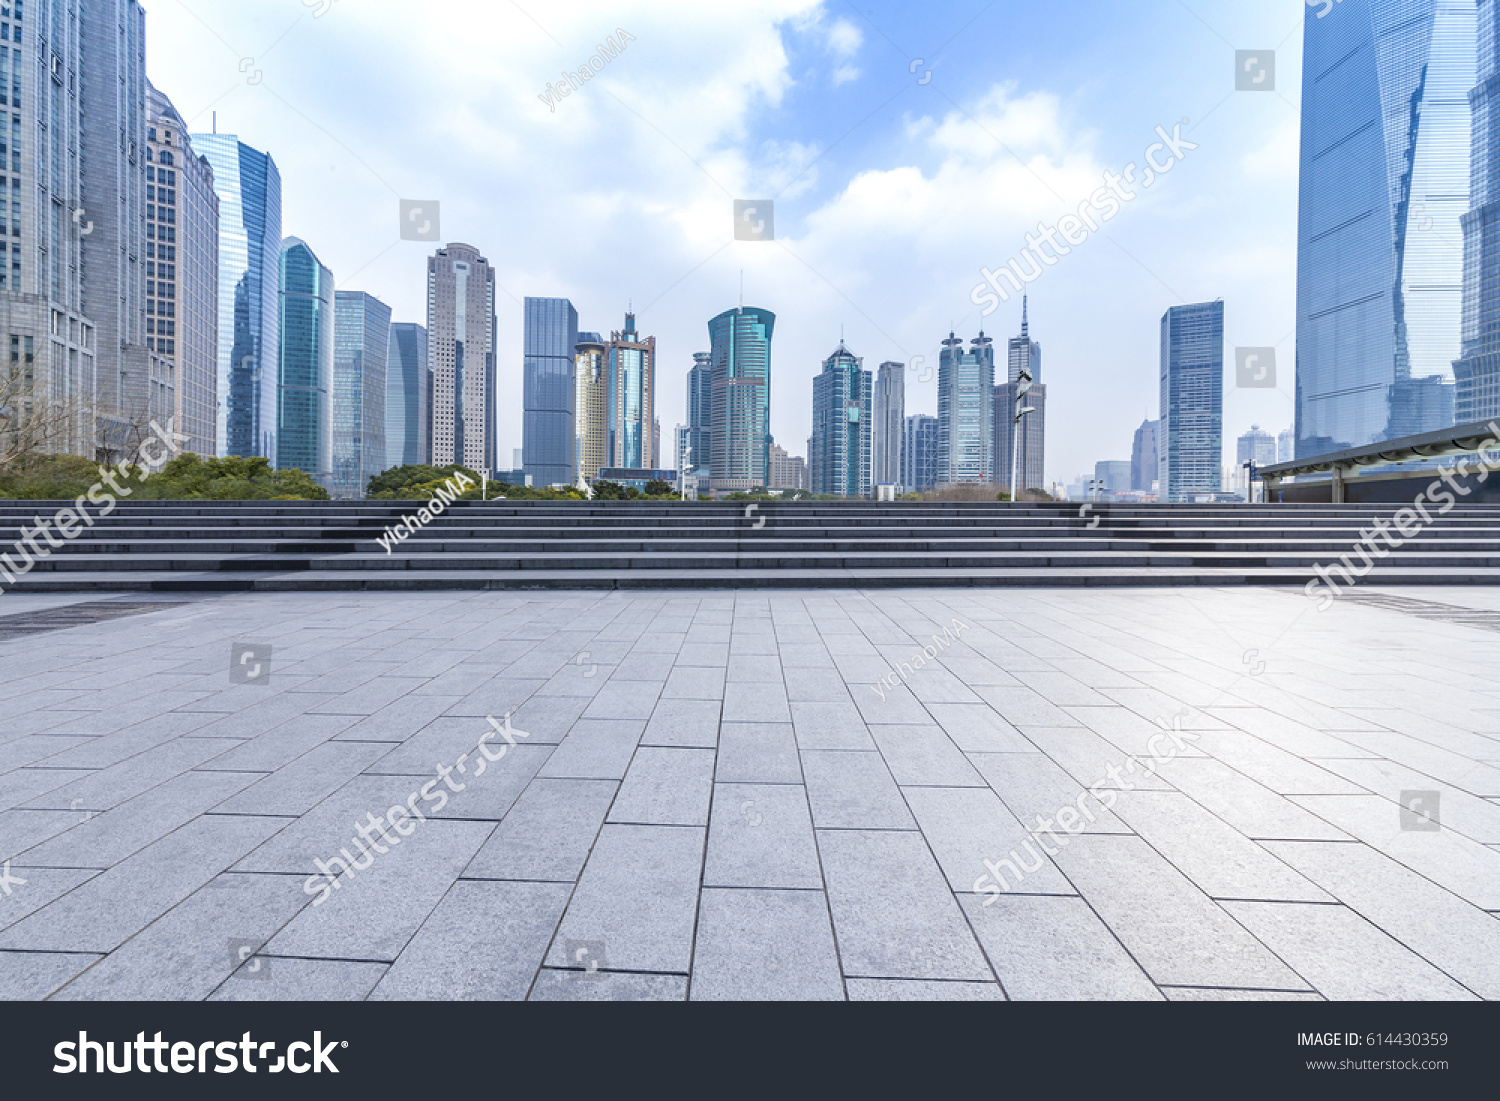 Panoramic skyline and buildings with empty concrete square floor #614430359